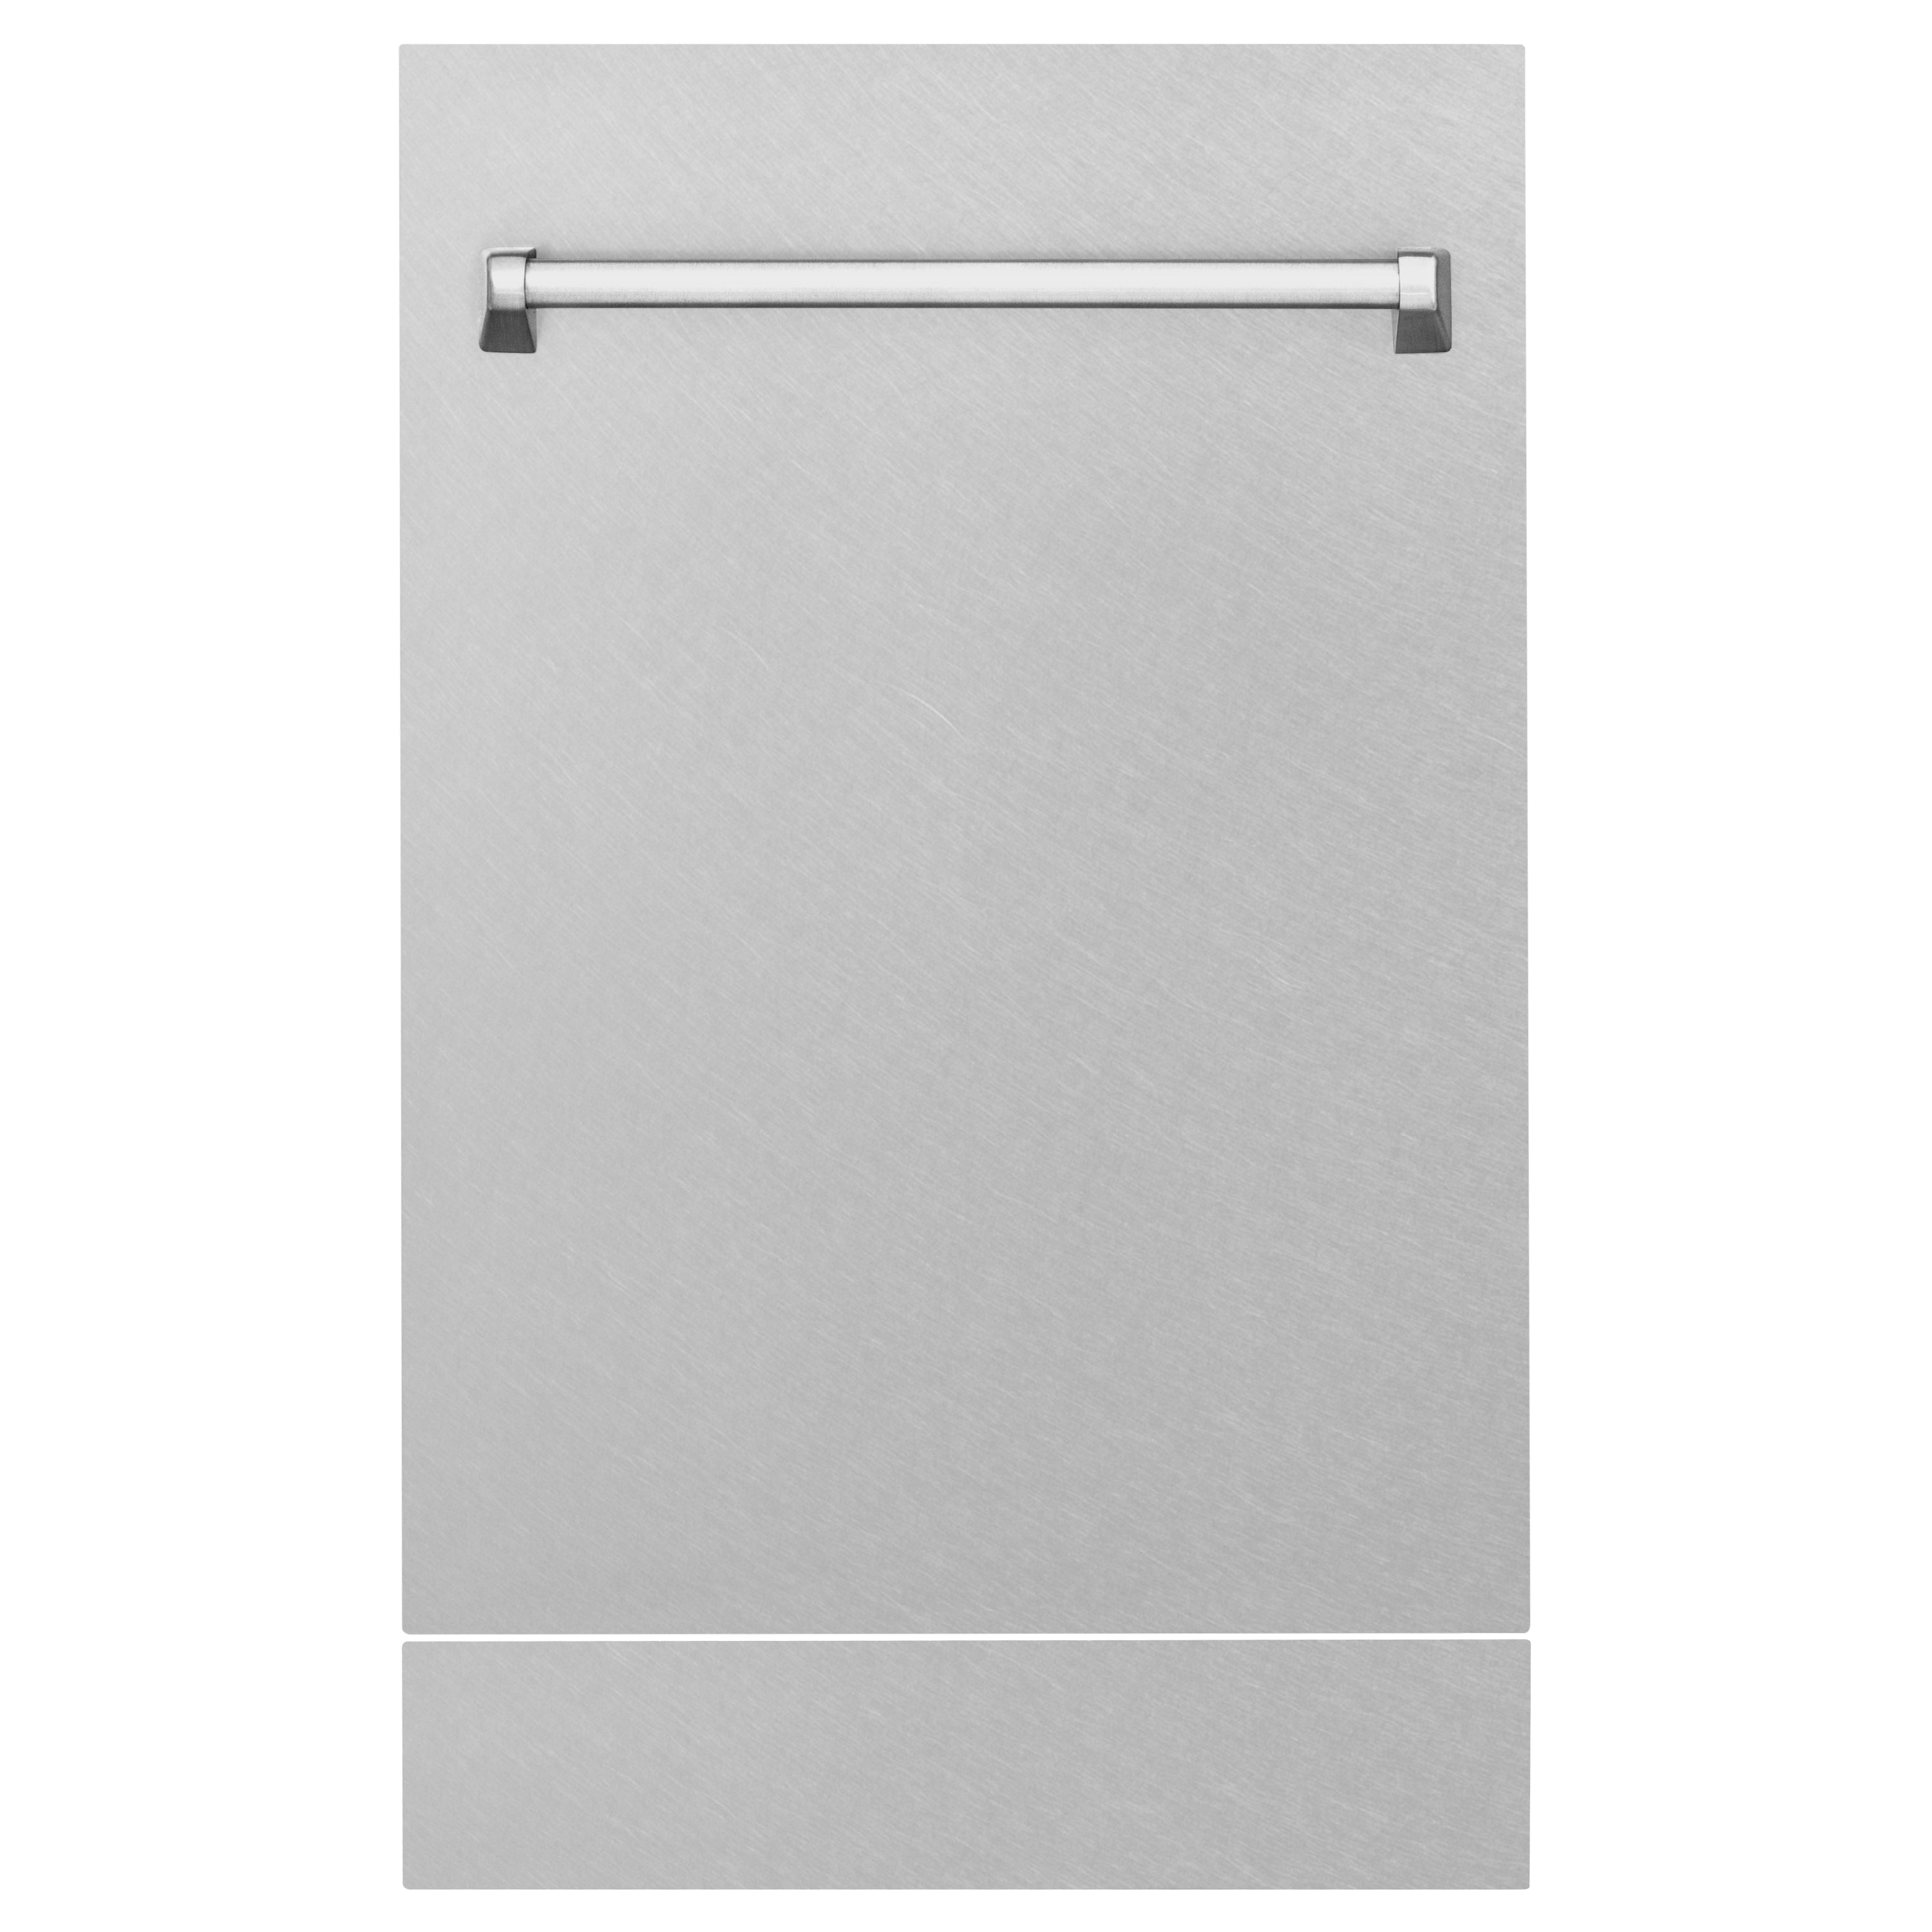 ZLINE 18" Tallac Dishwasher Panel in Fingerprint Resistant Stainless Steel with Traditional Handle (DPV-SN-18)